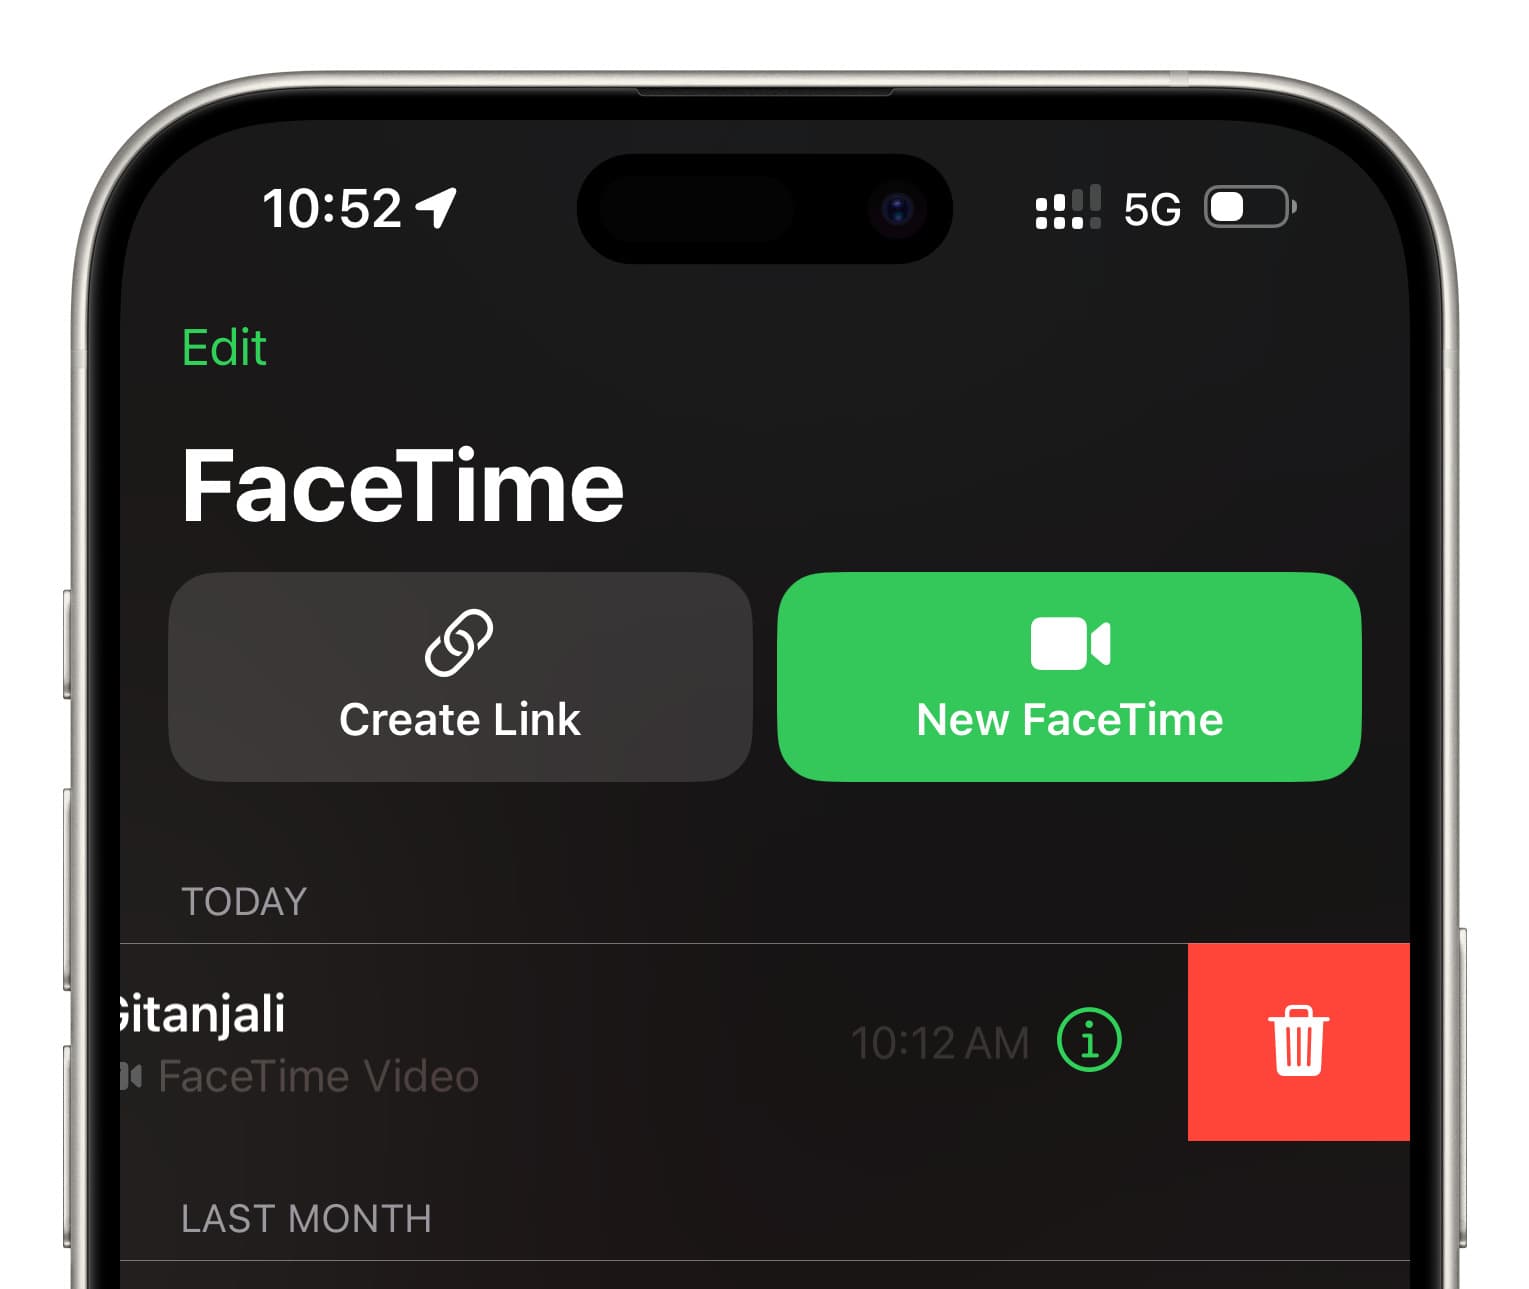 Swipe left on a recent call and tap red trash button to delete it in iPhone FaceTime app